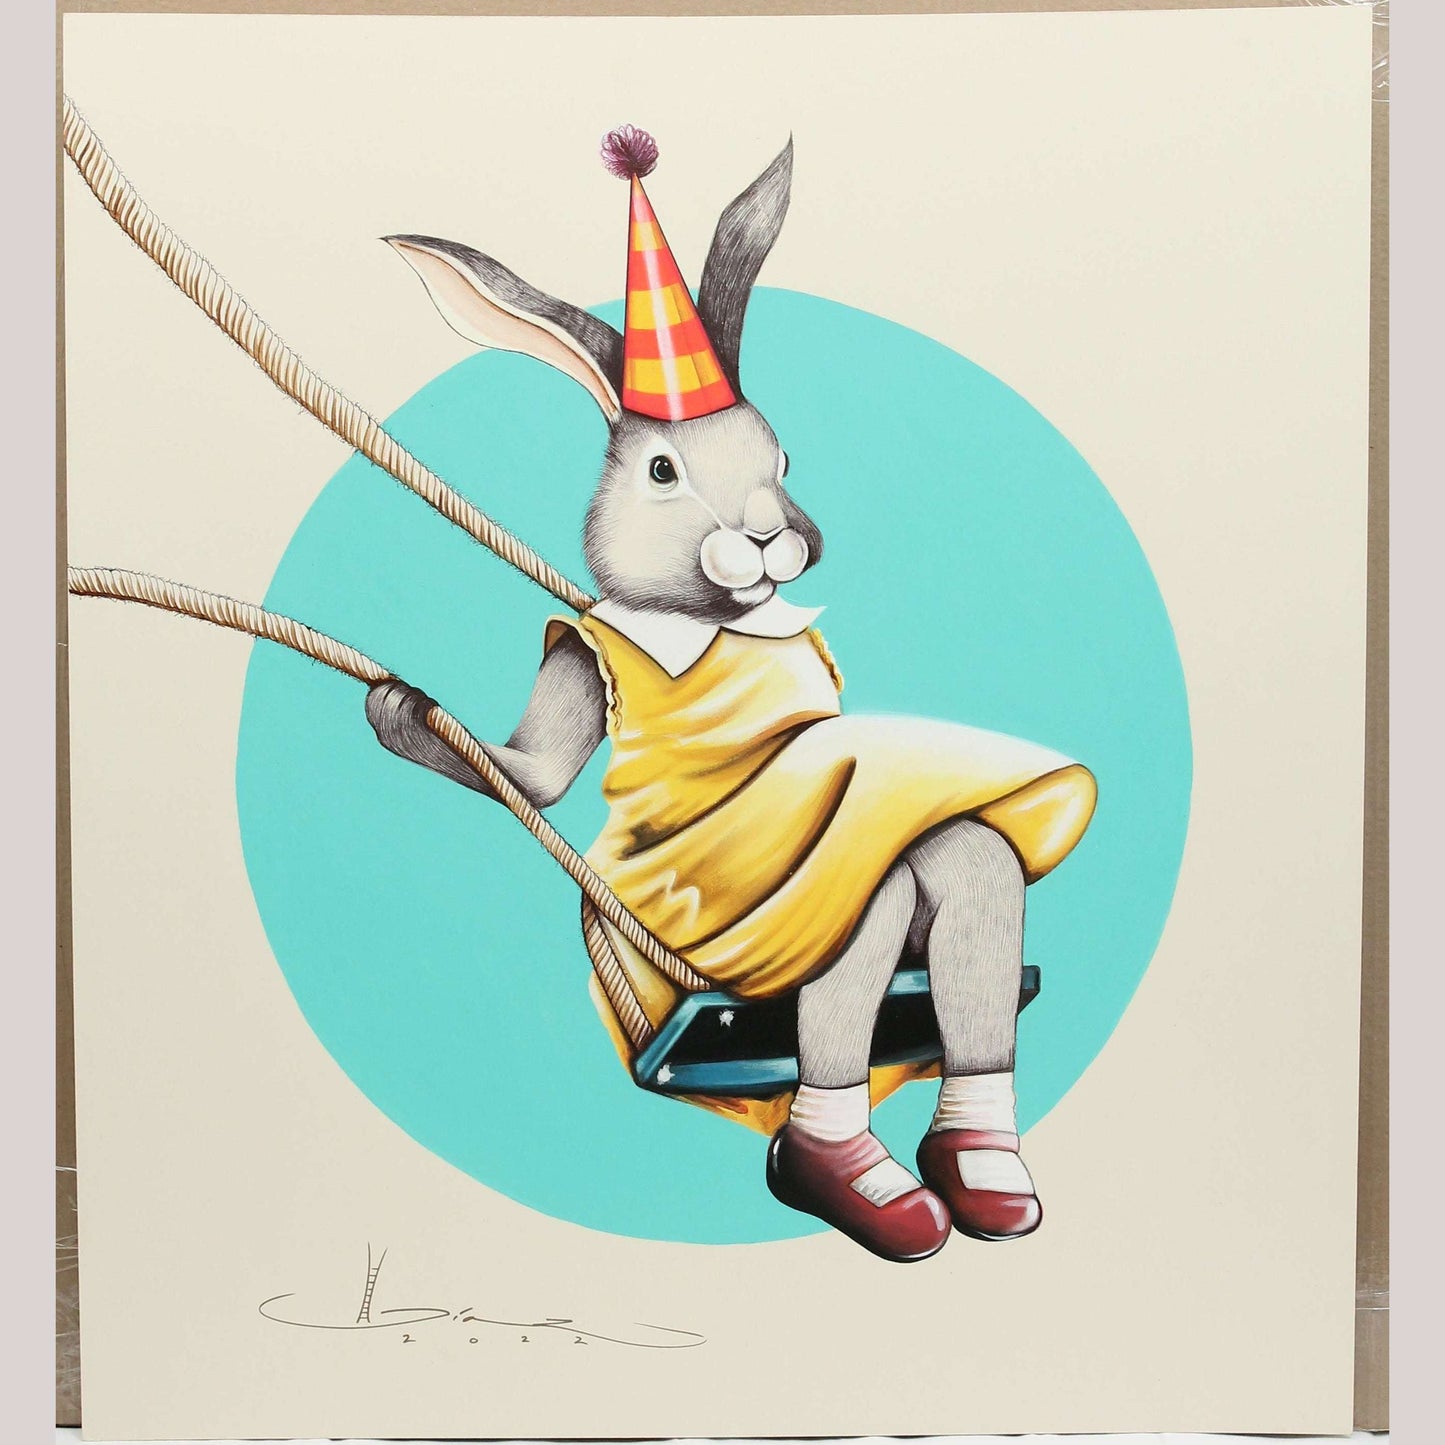 X-Lg Mexican Acrylic Fine Art Painting Signed Hermes Diaz Party Rabbit on Swing